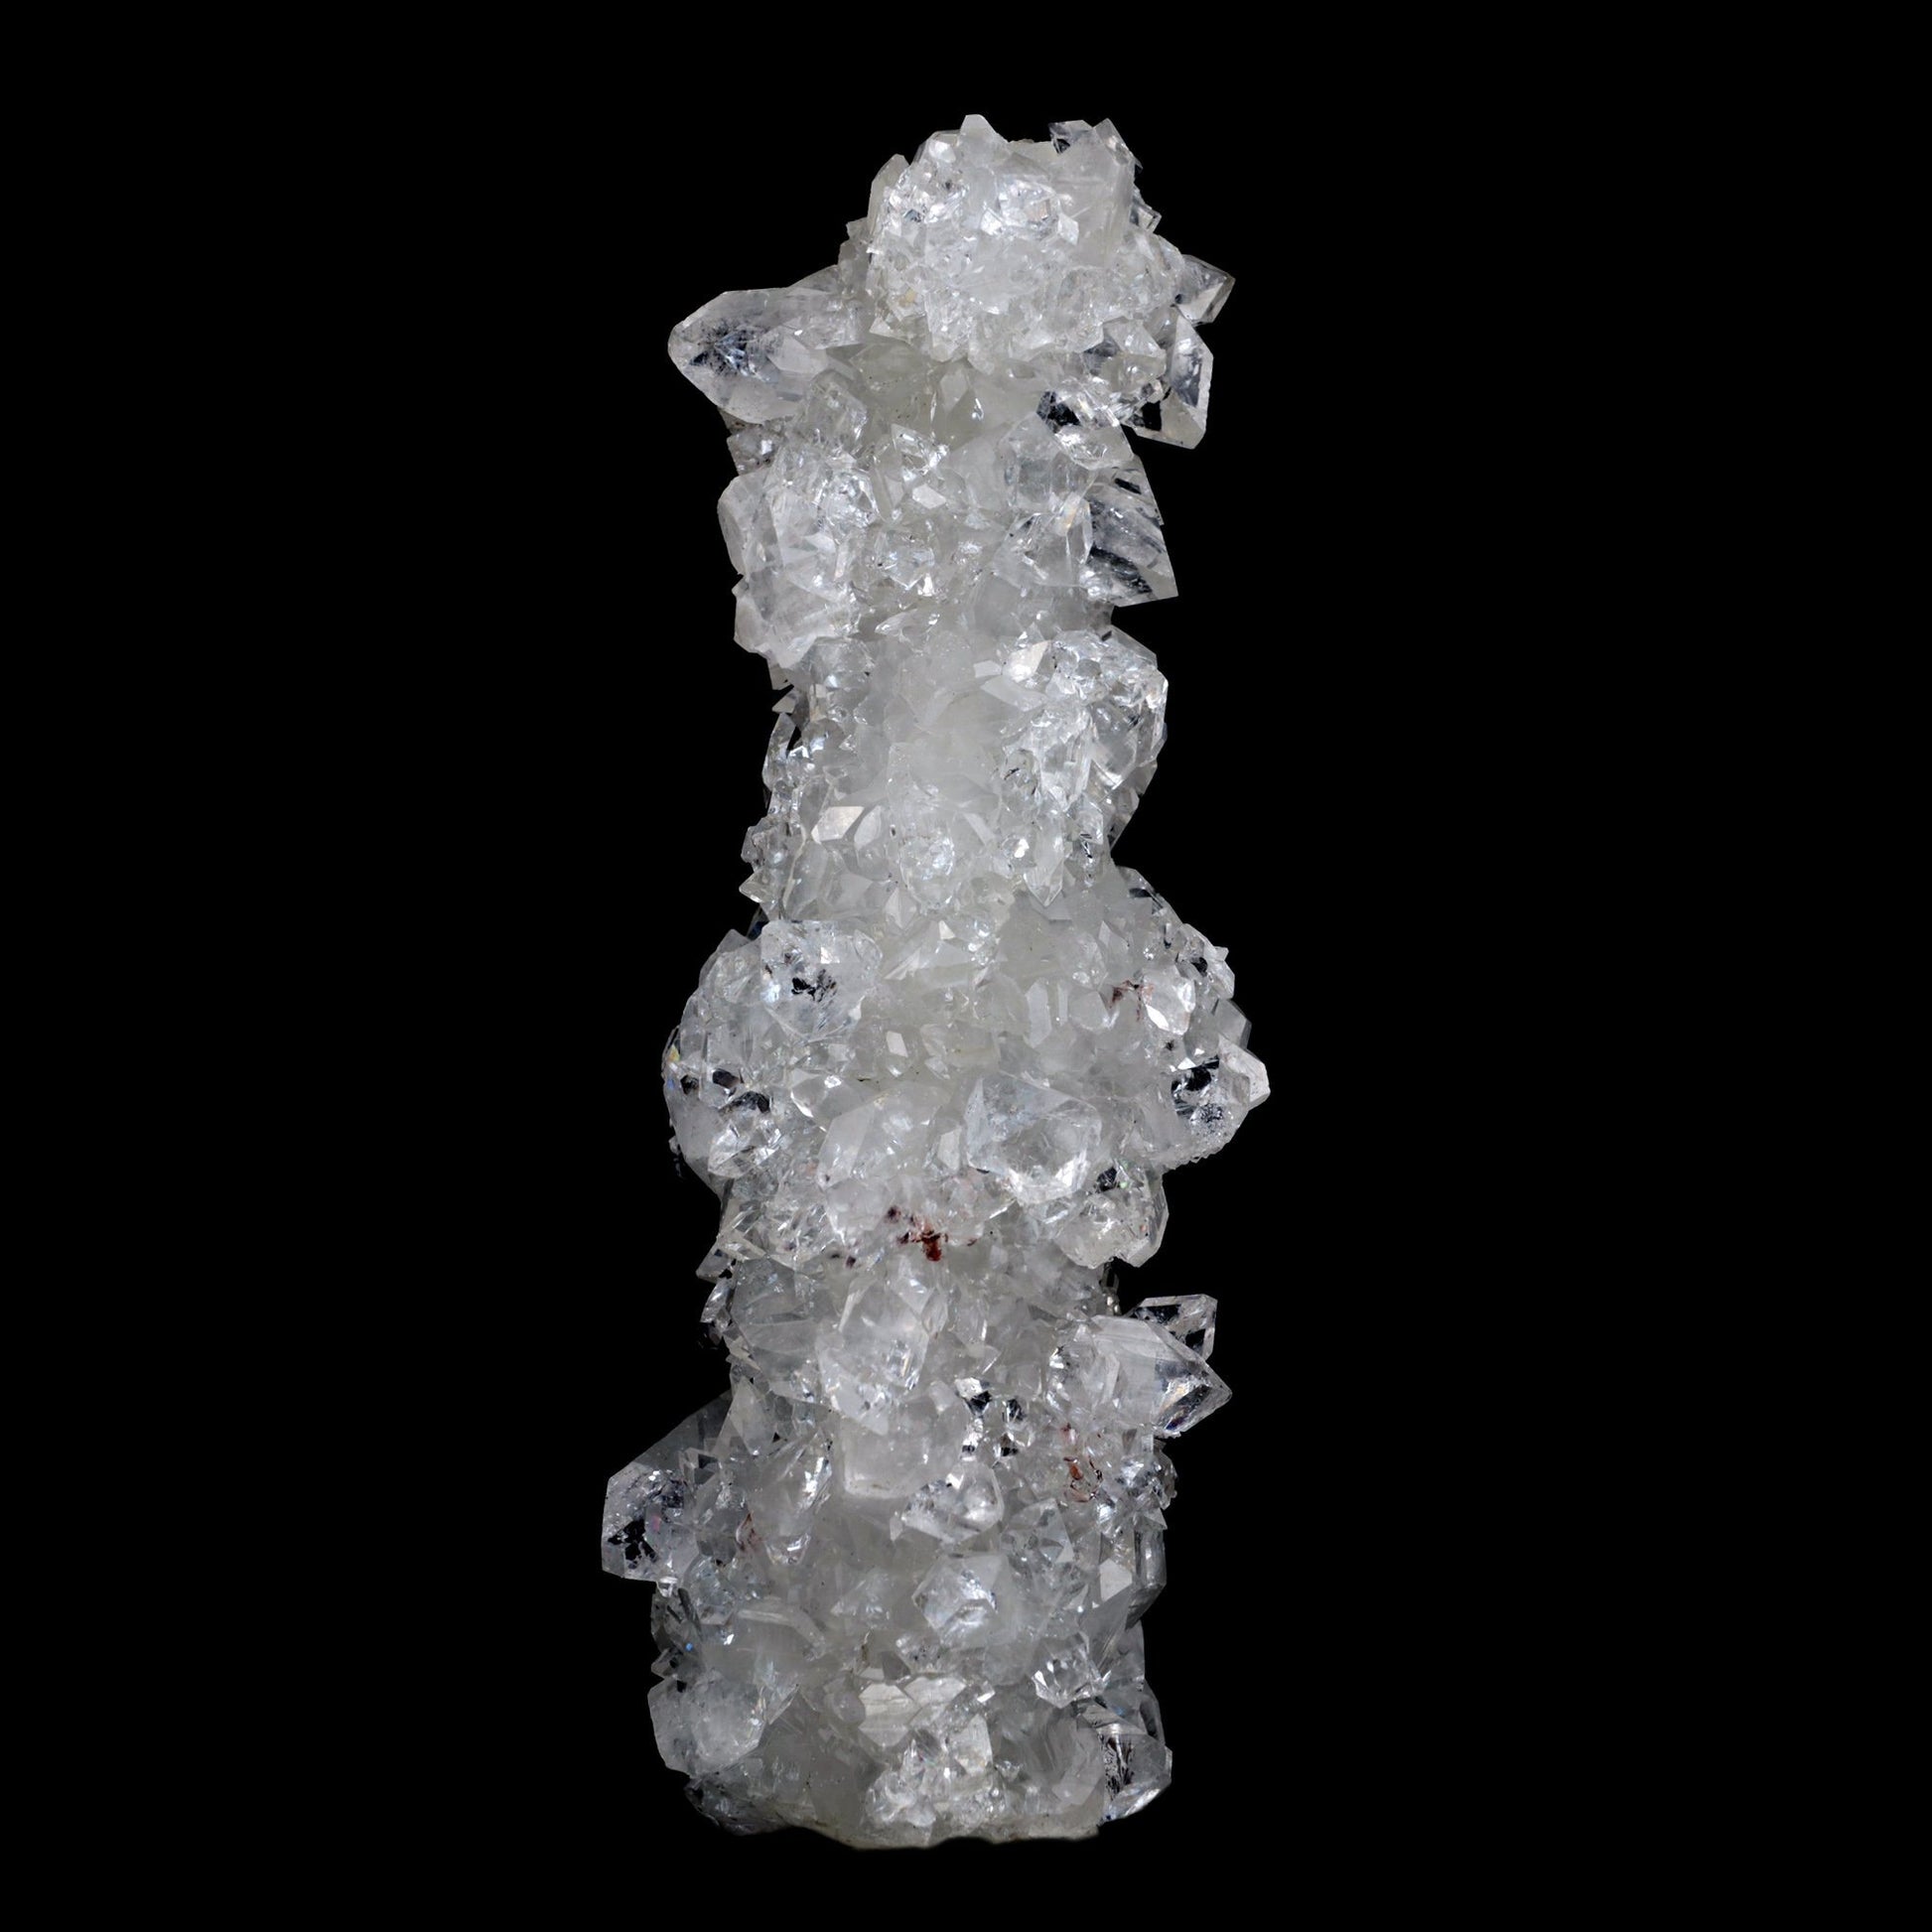 Apophyllite Sparkling Crystal Stalactite Natural Mineral Specimen # B …  https://www.superbminerals.us/products/apophyllite-sparkling-crystal-stalactite-natural-mineral-specimen-b-3913  FeaturesA splendid white, microcrystalline Apophyllite underground rock formation mostly covered with a glistening layer of Apophyllite crystals. The mix and differentiation alongside the radiance, shading and crystal development is remarkable. A striking and tasteful piece in superb condition.